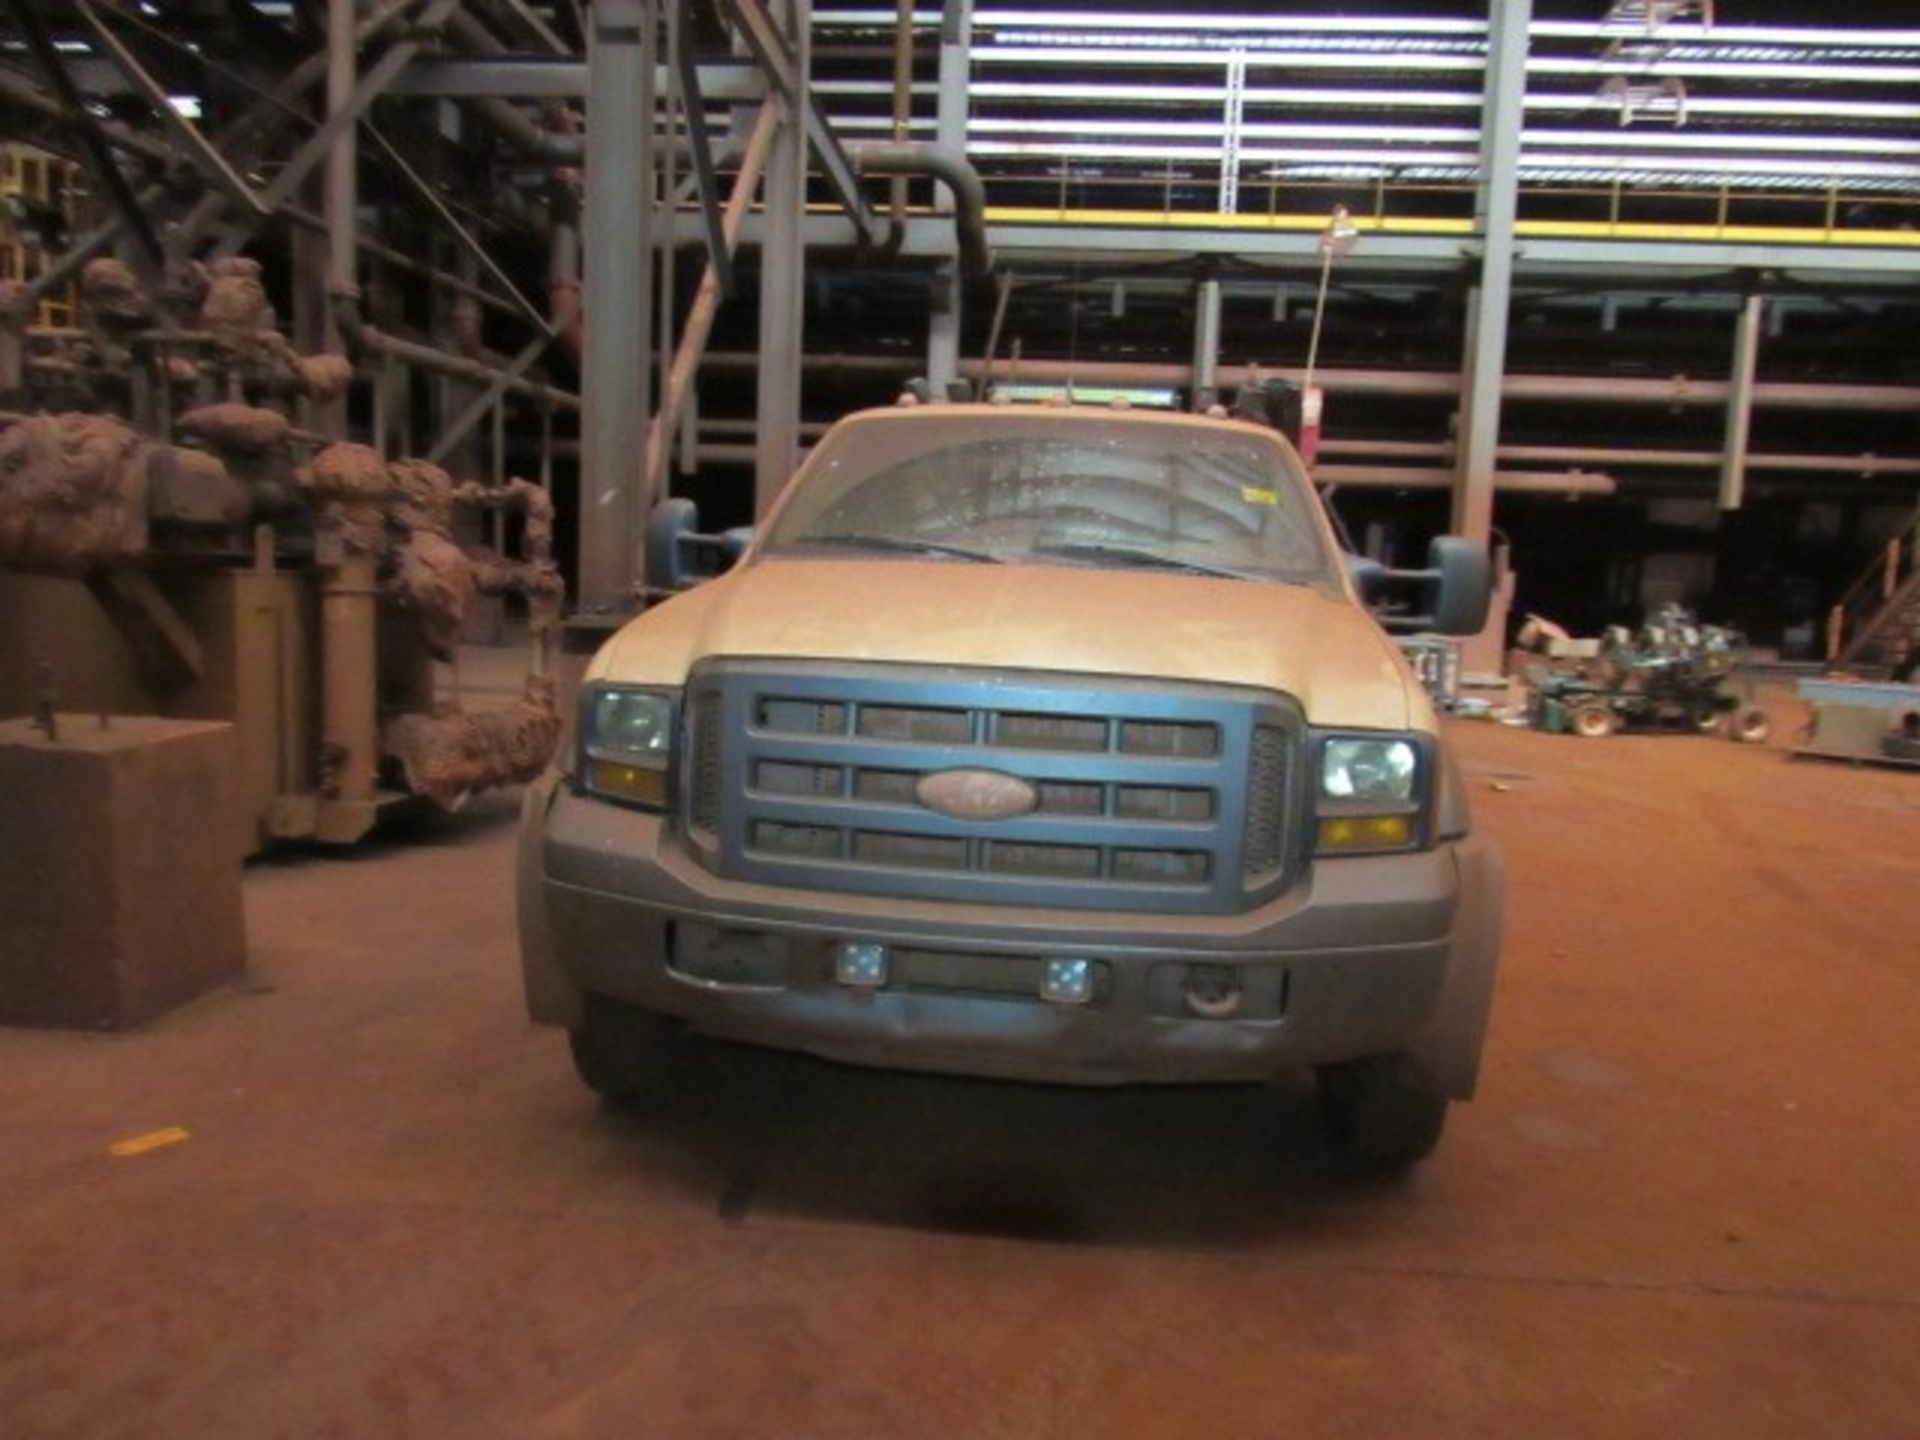 2006 Ford 4x4 service truck, model F450 - Image 2 of 7